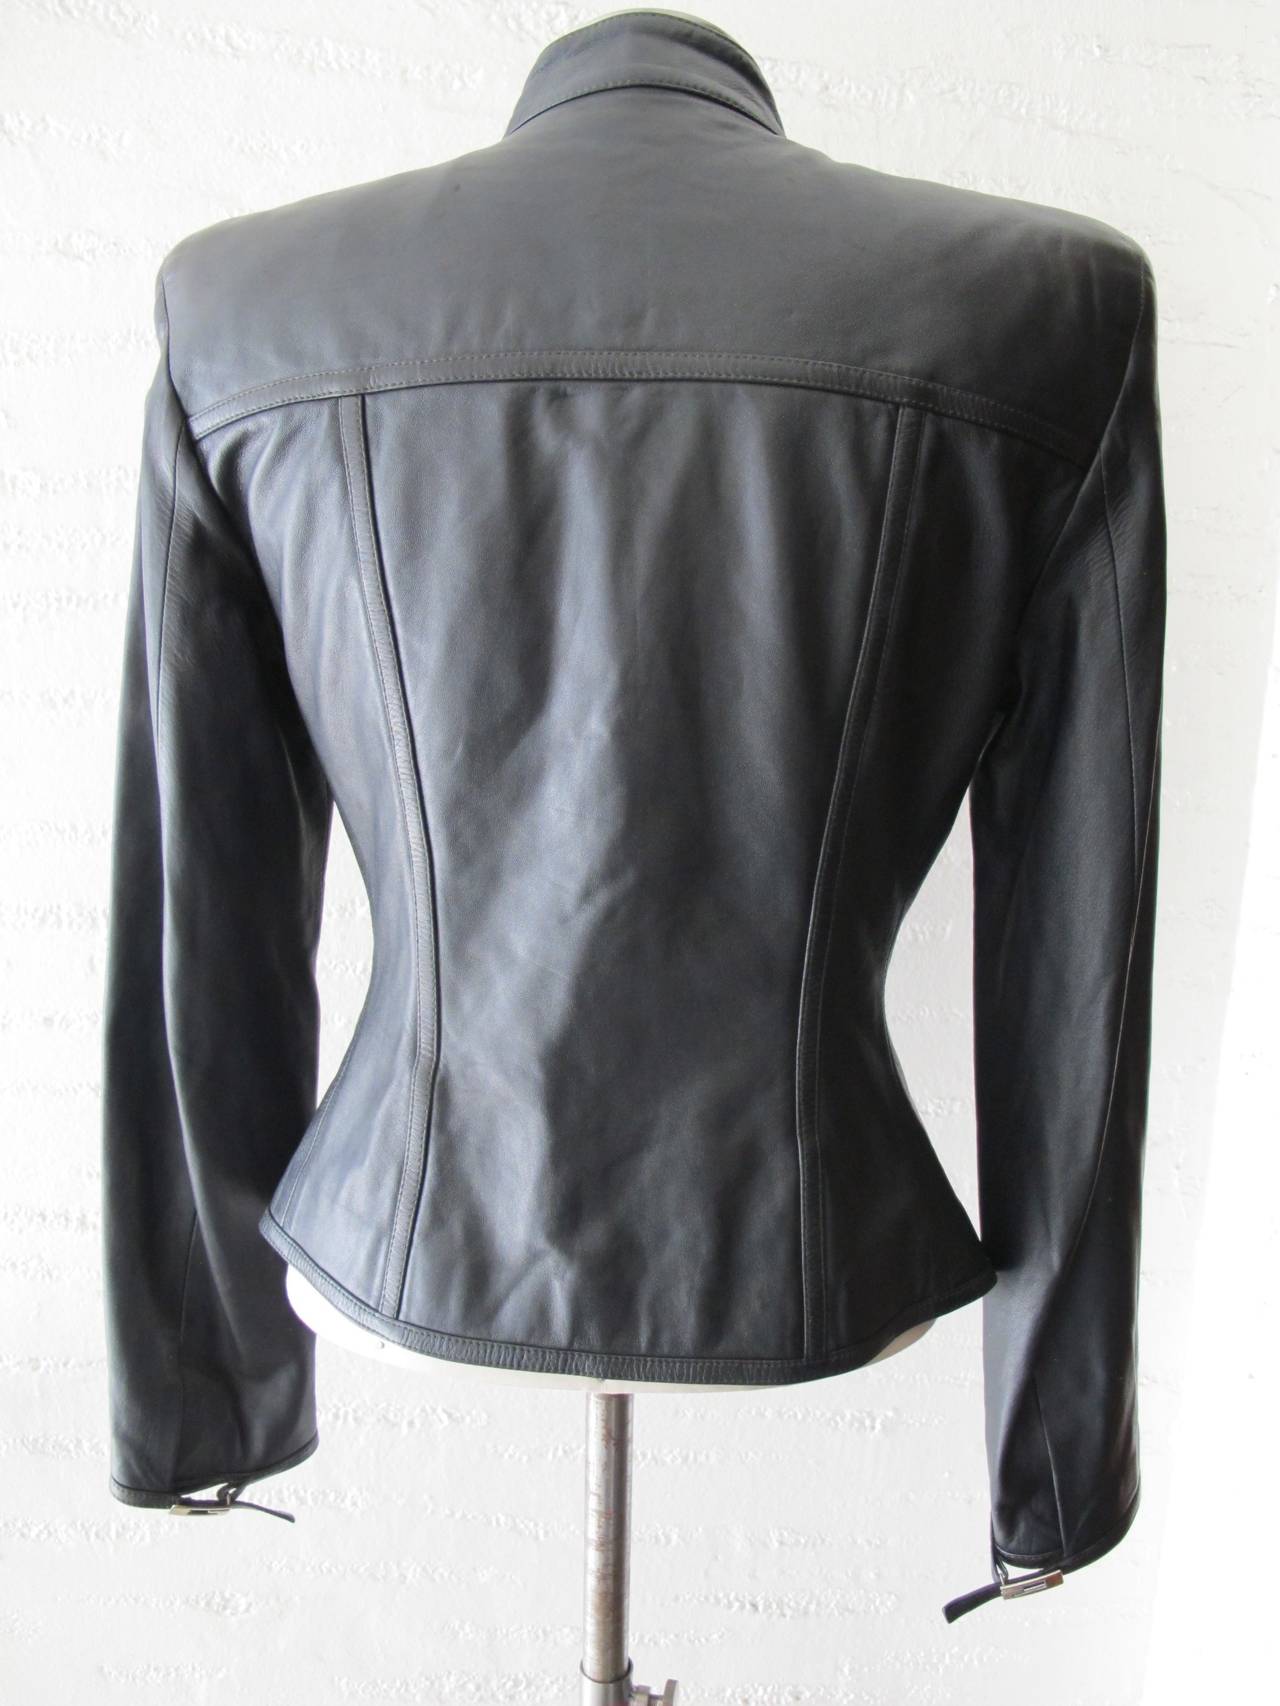 Women's Iconic Tom Ford Black Leather Jacket for Gucci For Sale